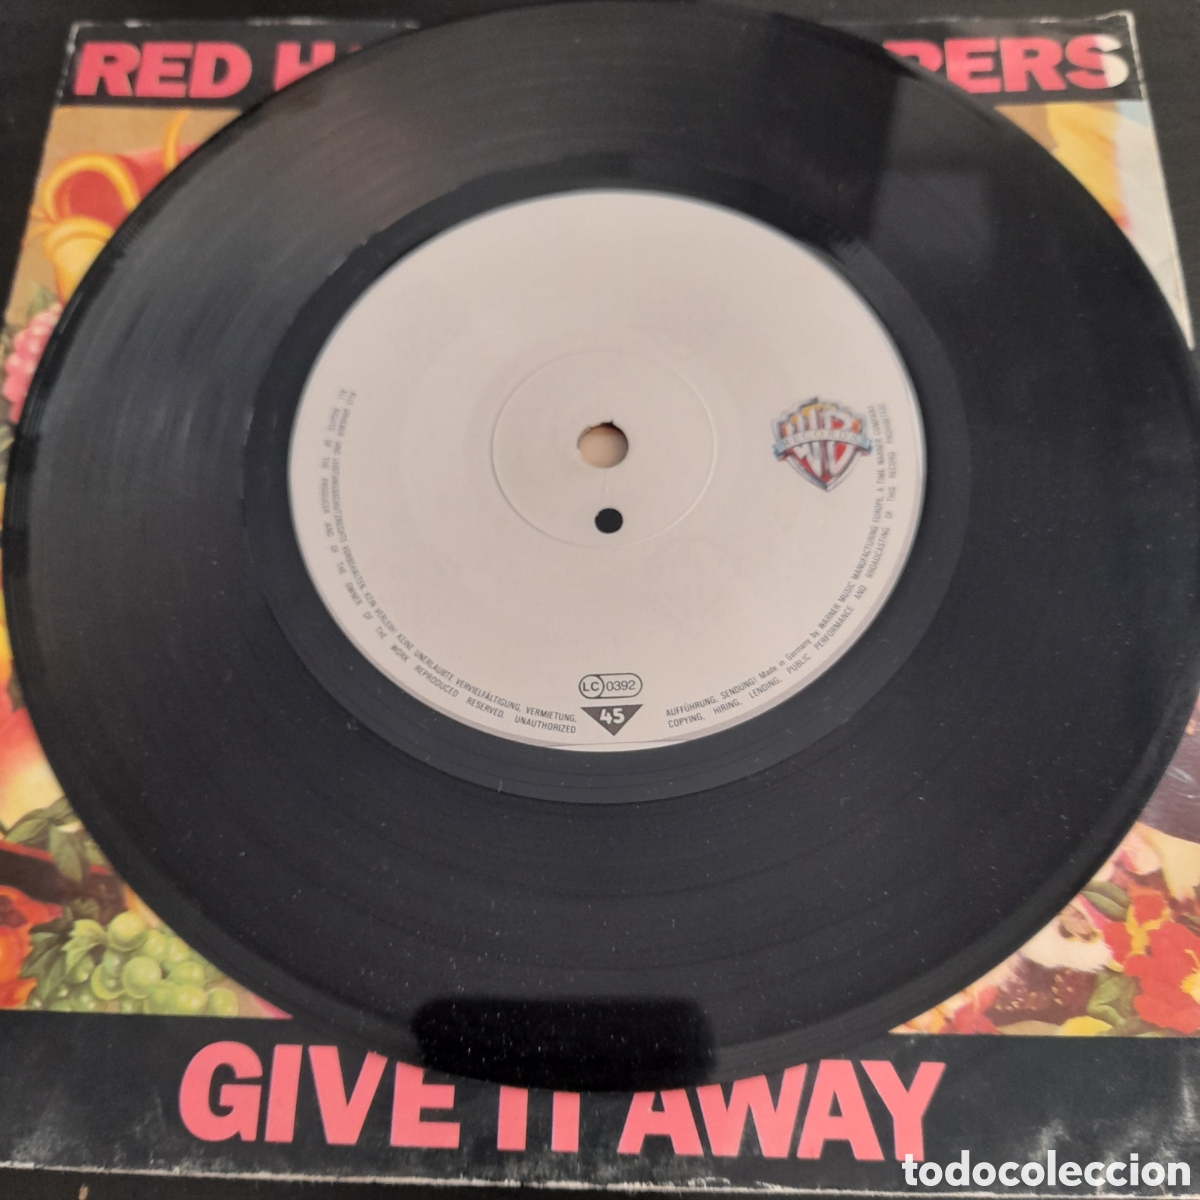 red hot chili peppers – give it away. 1991. eur - Buy Vinyl Singles of  Pop-Rock International since the 90s on todocoleccion